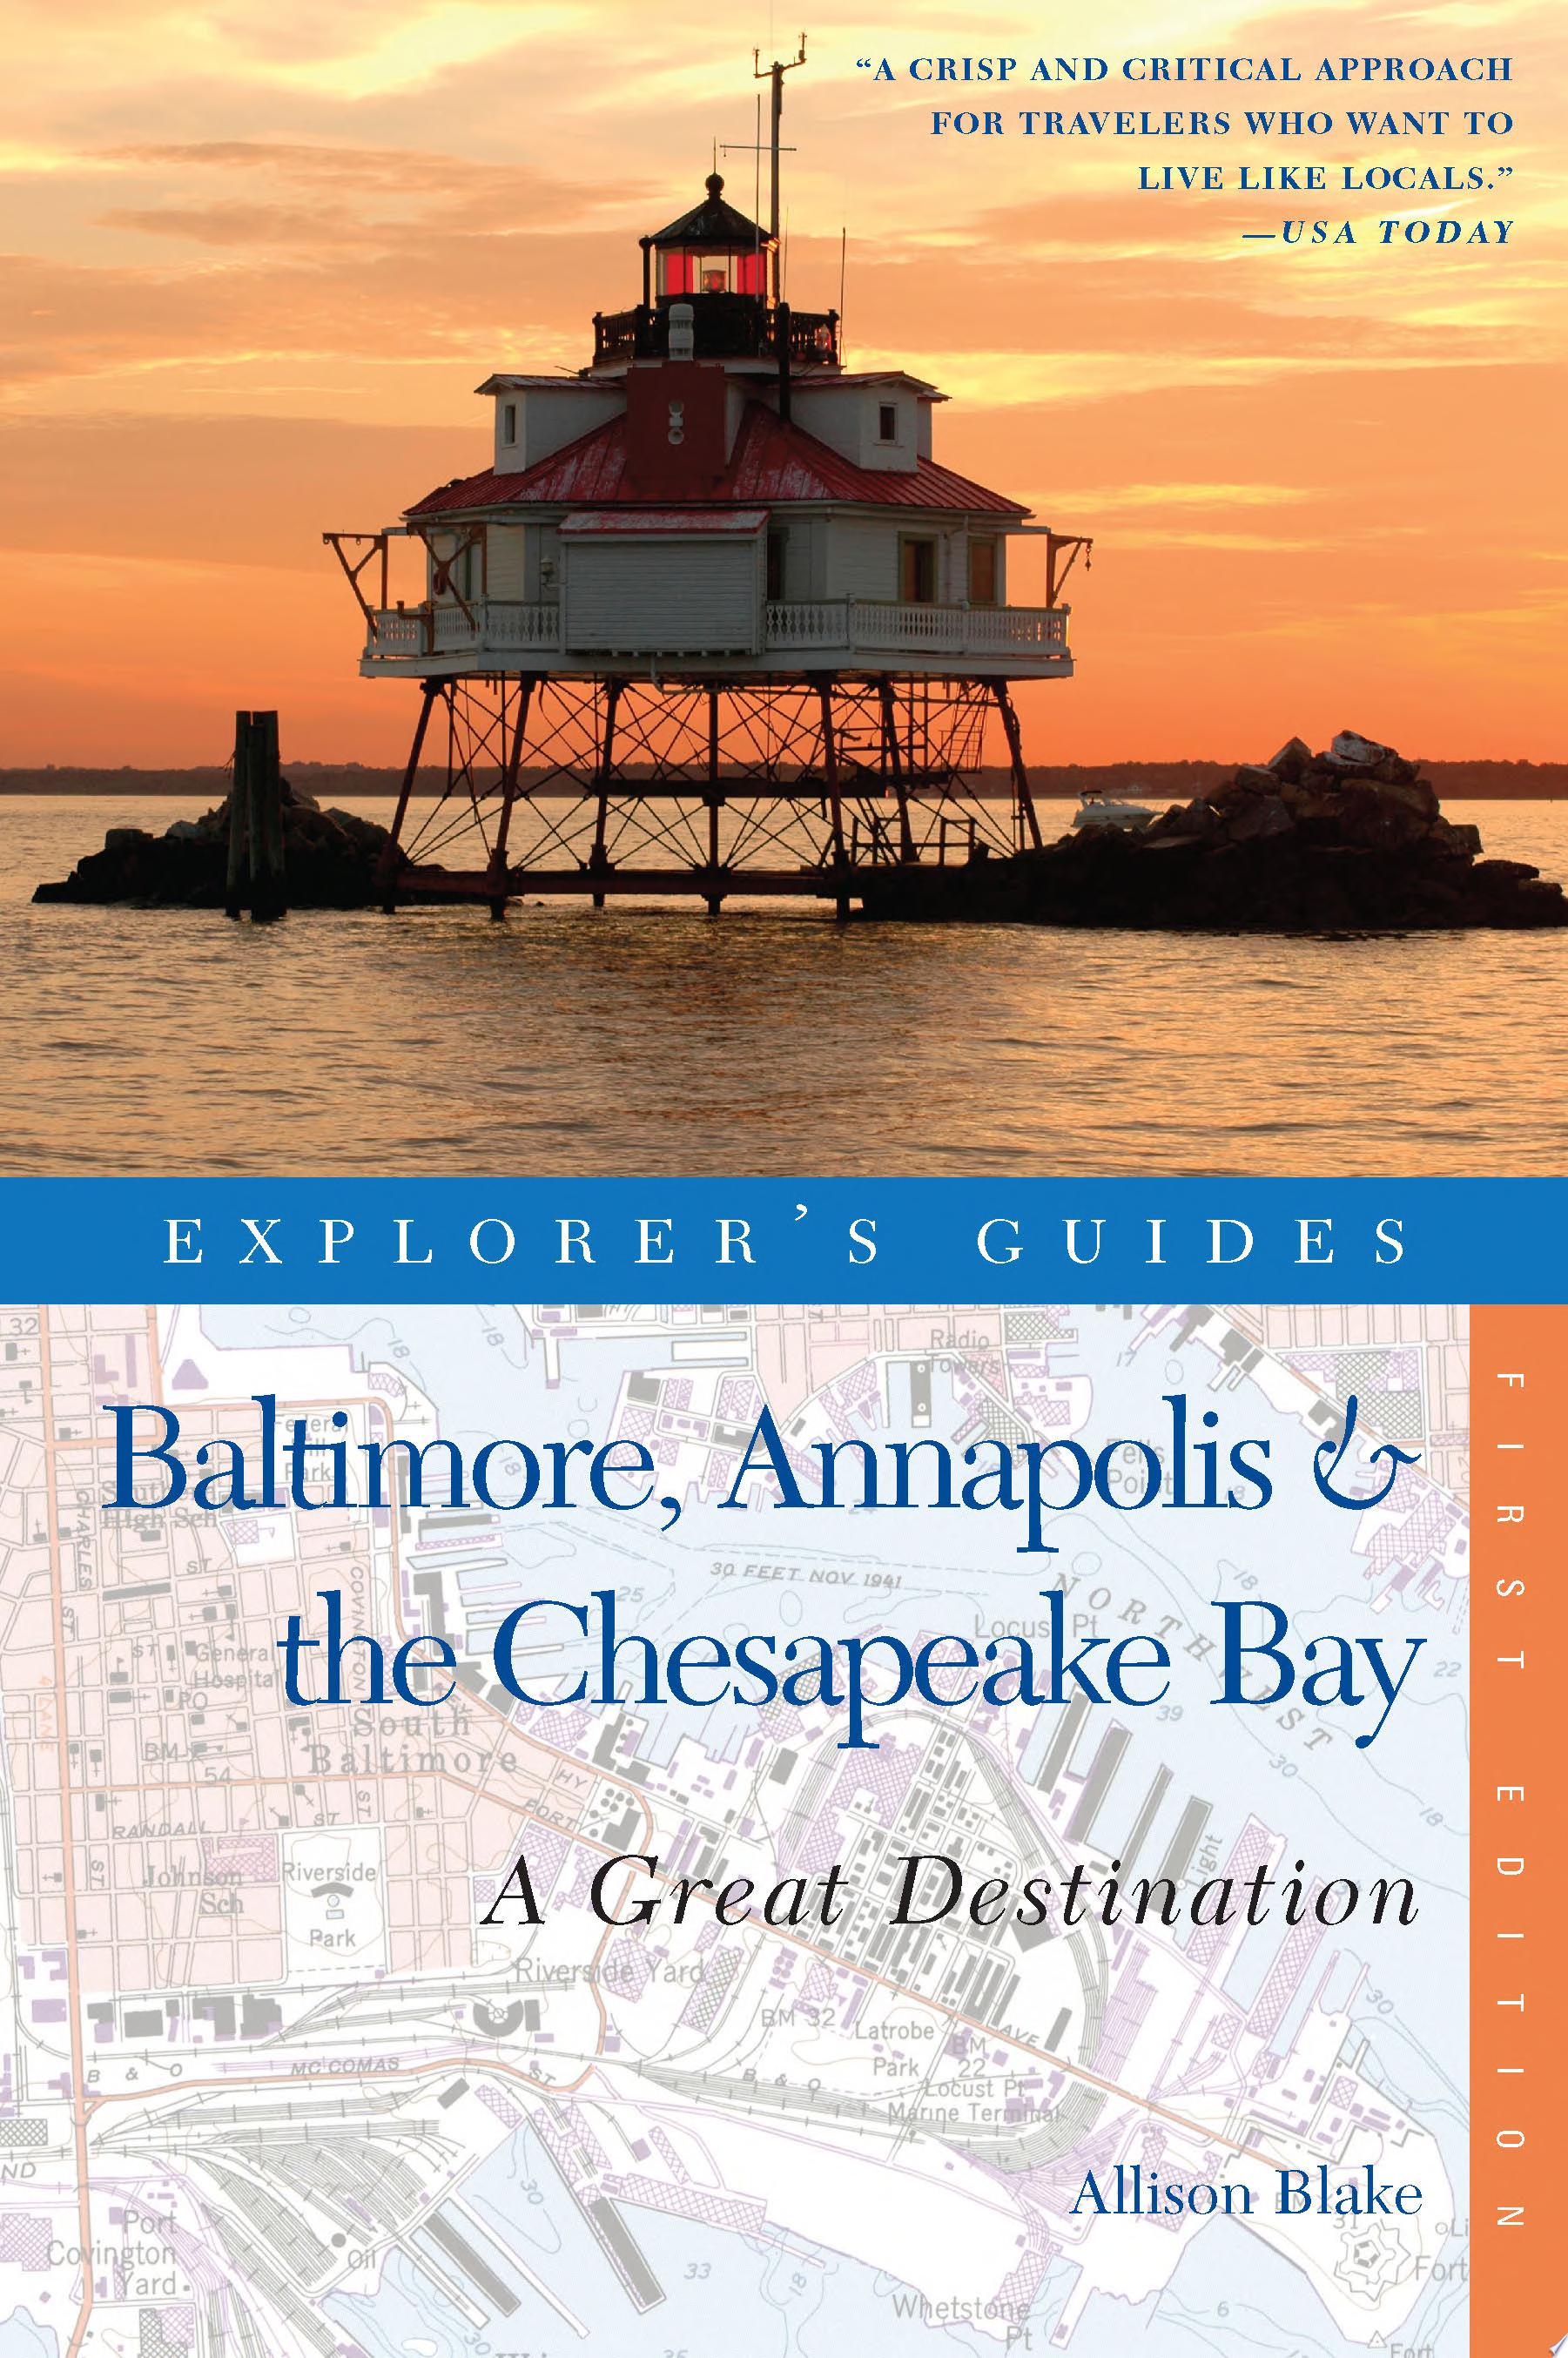 Image for "Explorer's Guide Baltimore, Annapolis & The Chesapeake Bay"